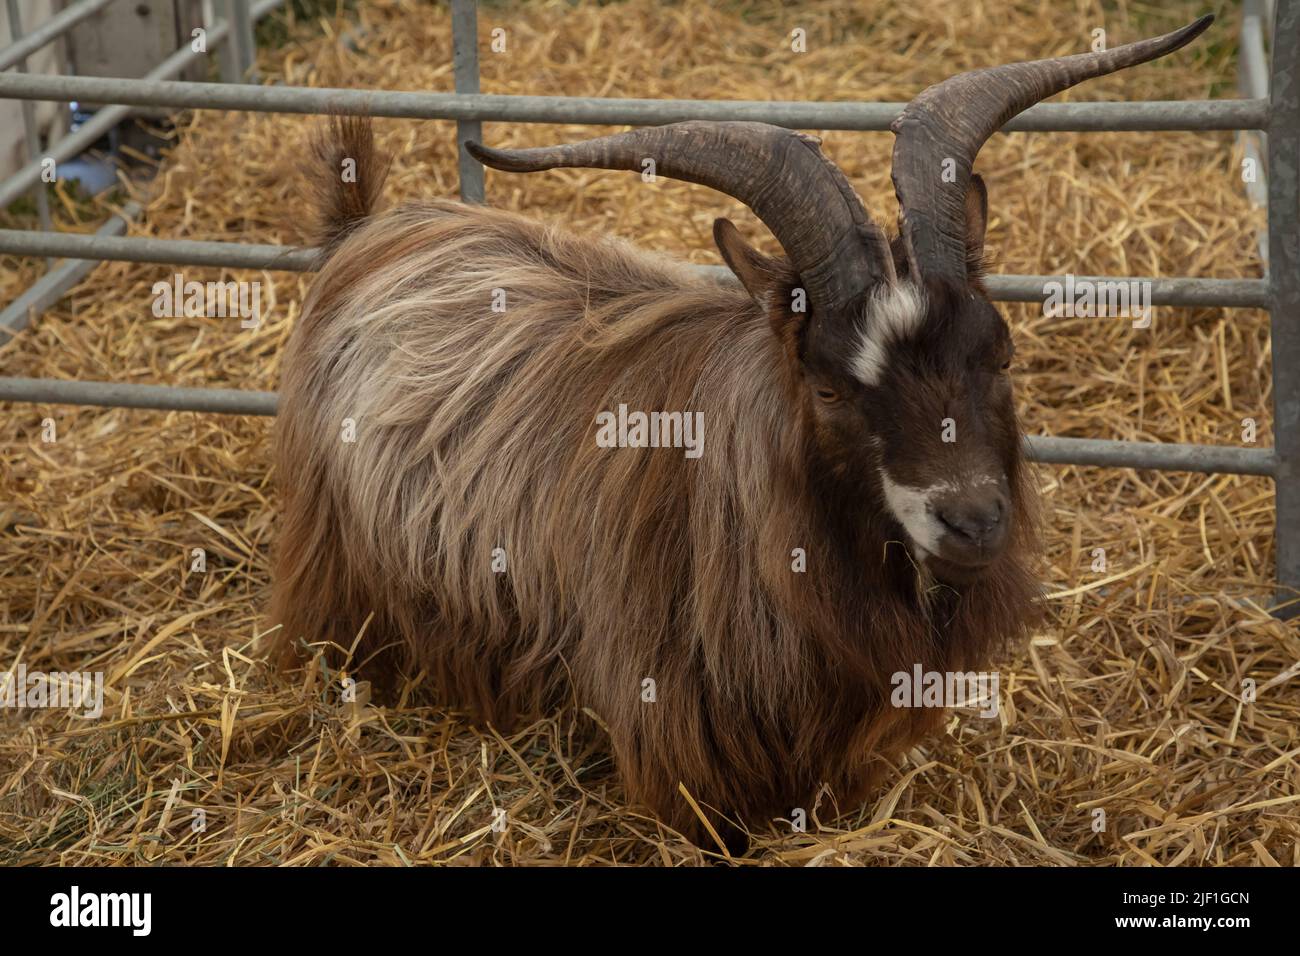 Brown long haired goat with magnificent horns in a pen surrounded by straw bedding Stock Photo